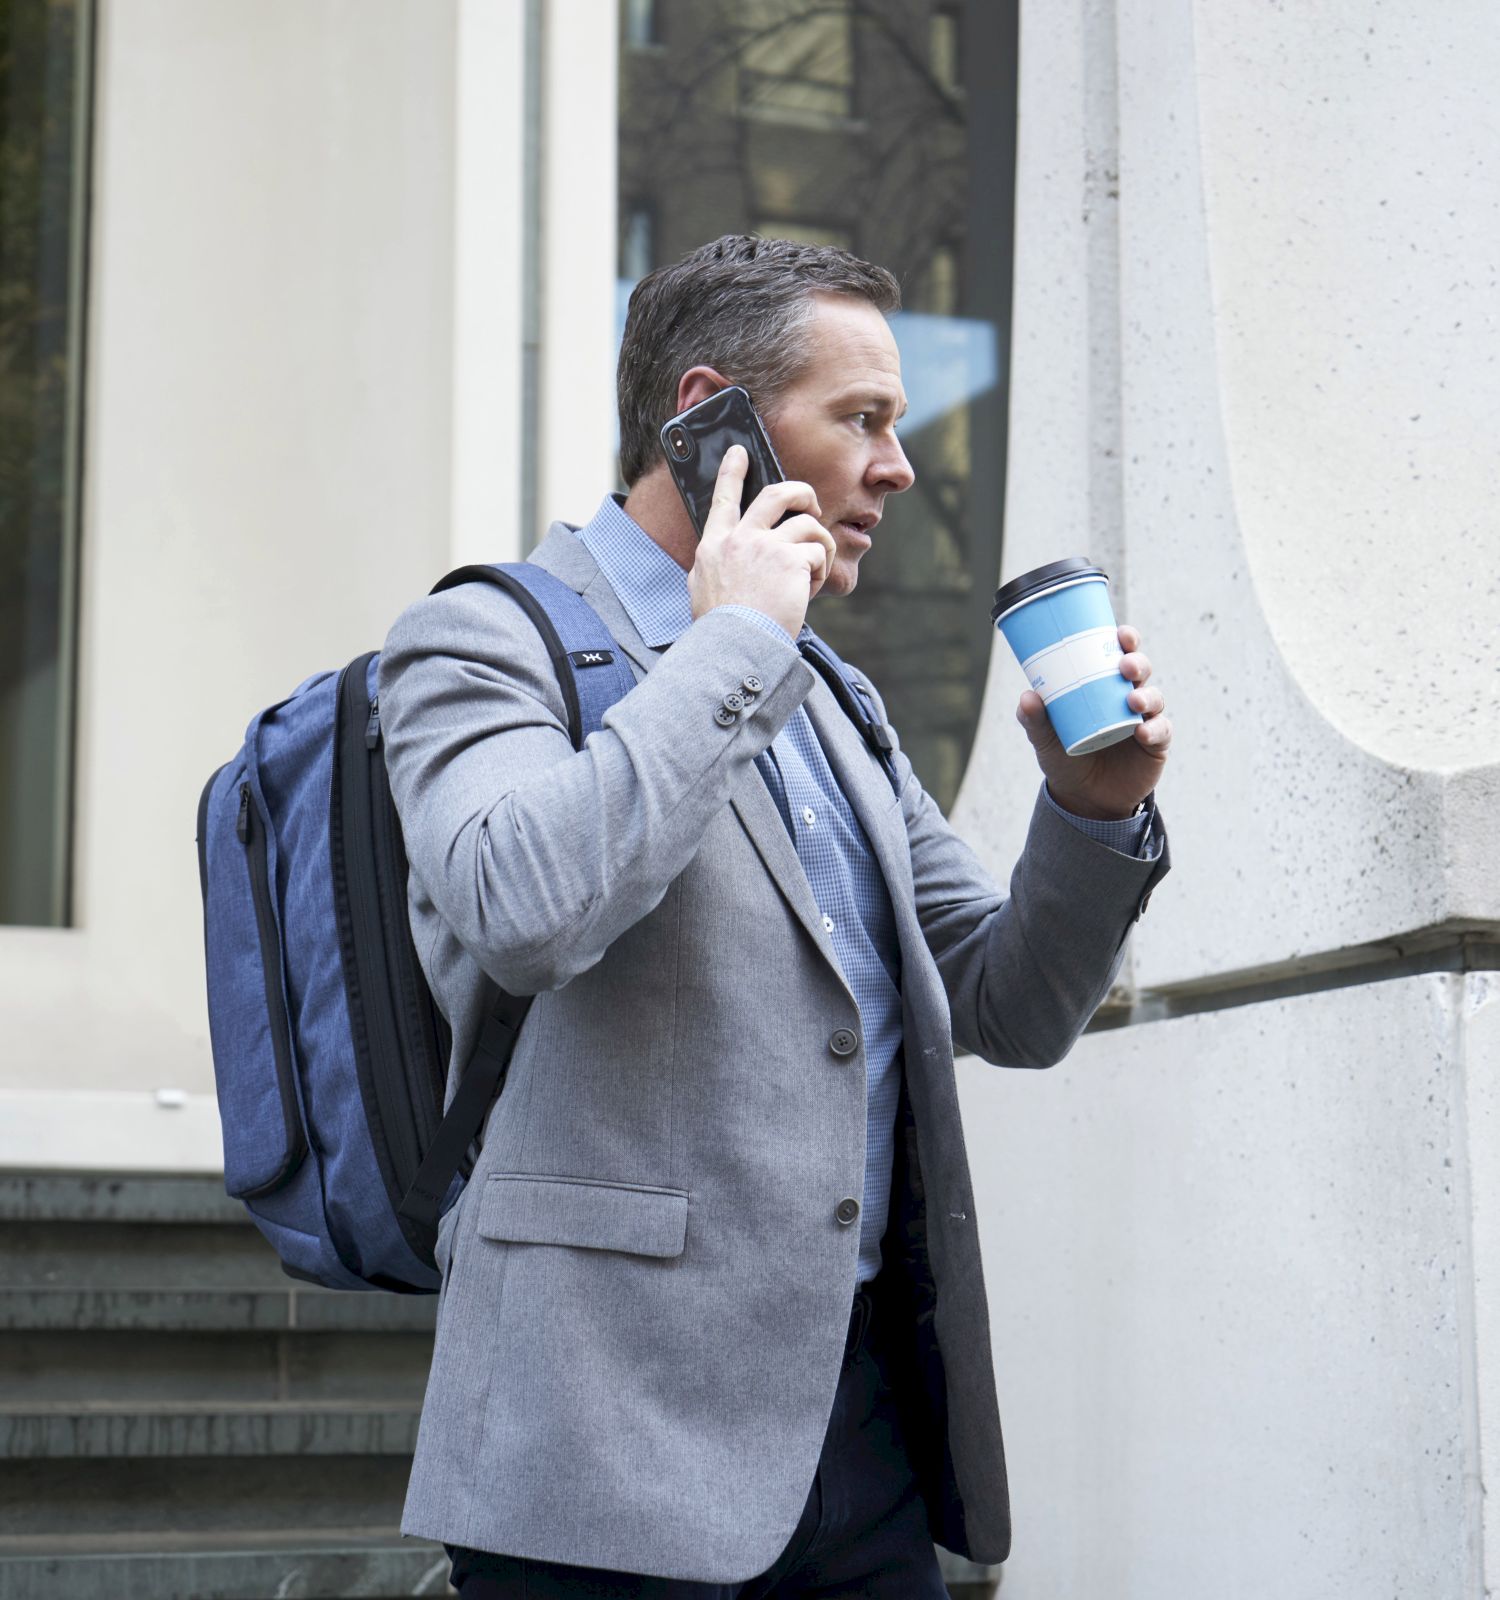 A man in a gray blazer with a backpack talks on the phone and holds a coffee cup, standing near a building with glass windows and steps.